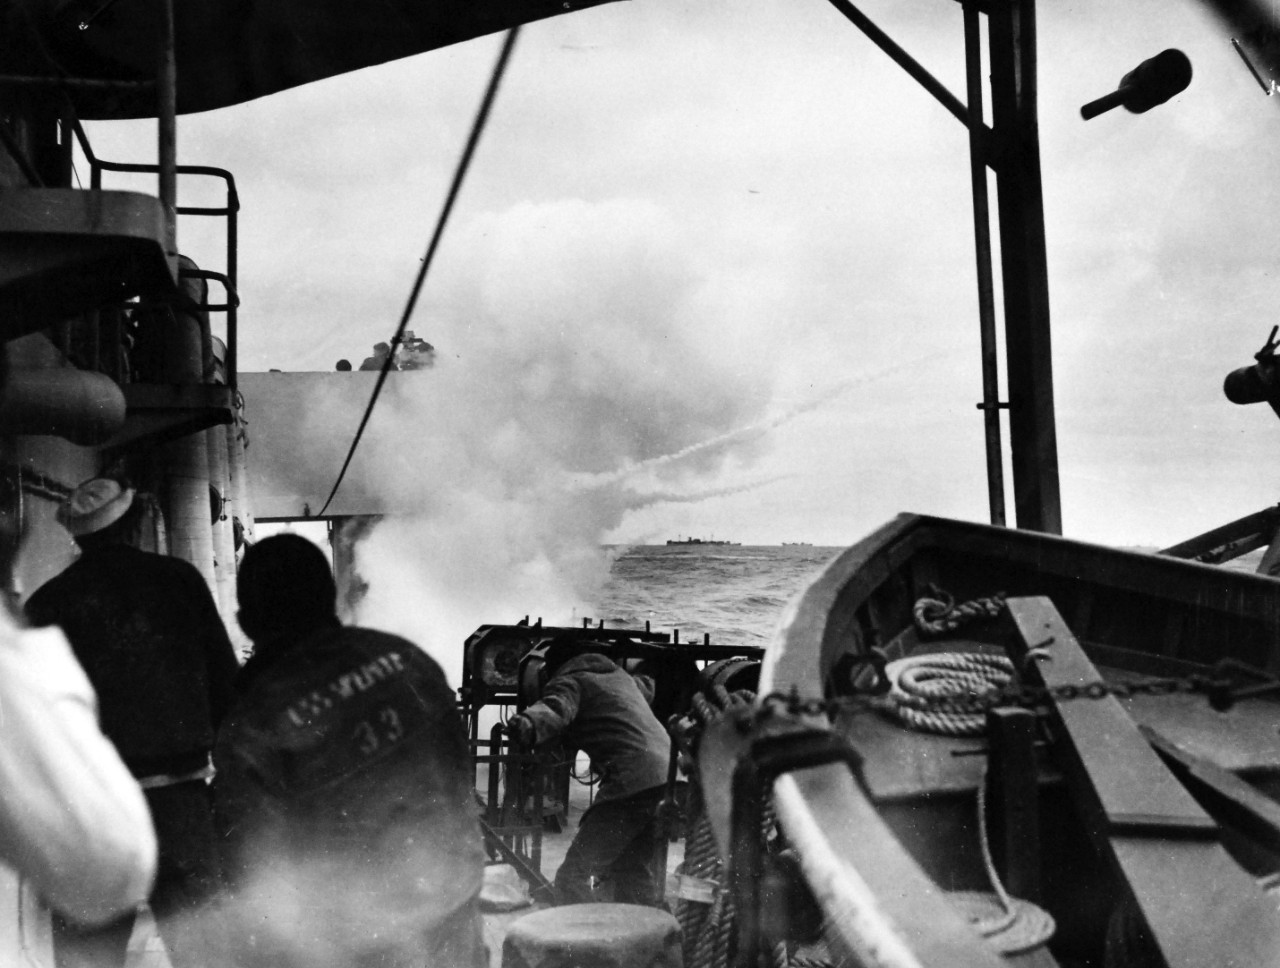 26-G-1515:  Sinking of German submarine U-175, April  1943.   The submarine was sunk off south-west of Ireland by USCGC  Spencer (WPG-36) on April 17, 1943.  Official Caption: "COAST GUARD CUTTER SINKS SUB: Sailors aboard the U.S. Coast Guard Cutter USCGC SPENCER (WPG-36) watch a K-Gun go into action following detection of a submarine below [the] surface. This is the opening round of a battle in which the sub is blown to the surface, where it is engaged by Coast Guardsmen protecting a large Atlantic convoy." Date: 17 April 1943.  Official U.S. Coast Guard Photograph, now in the collections of the National Archives.  (2017/09/05).